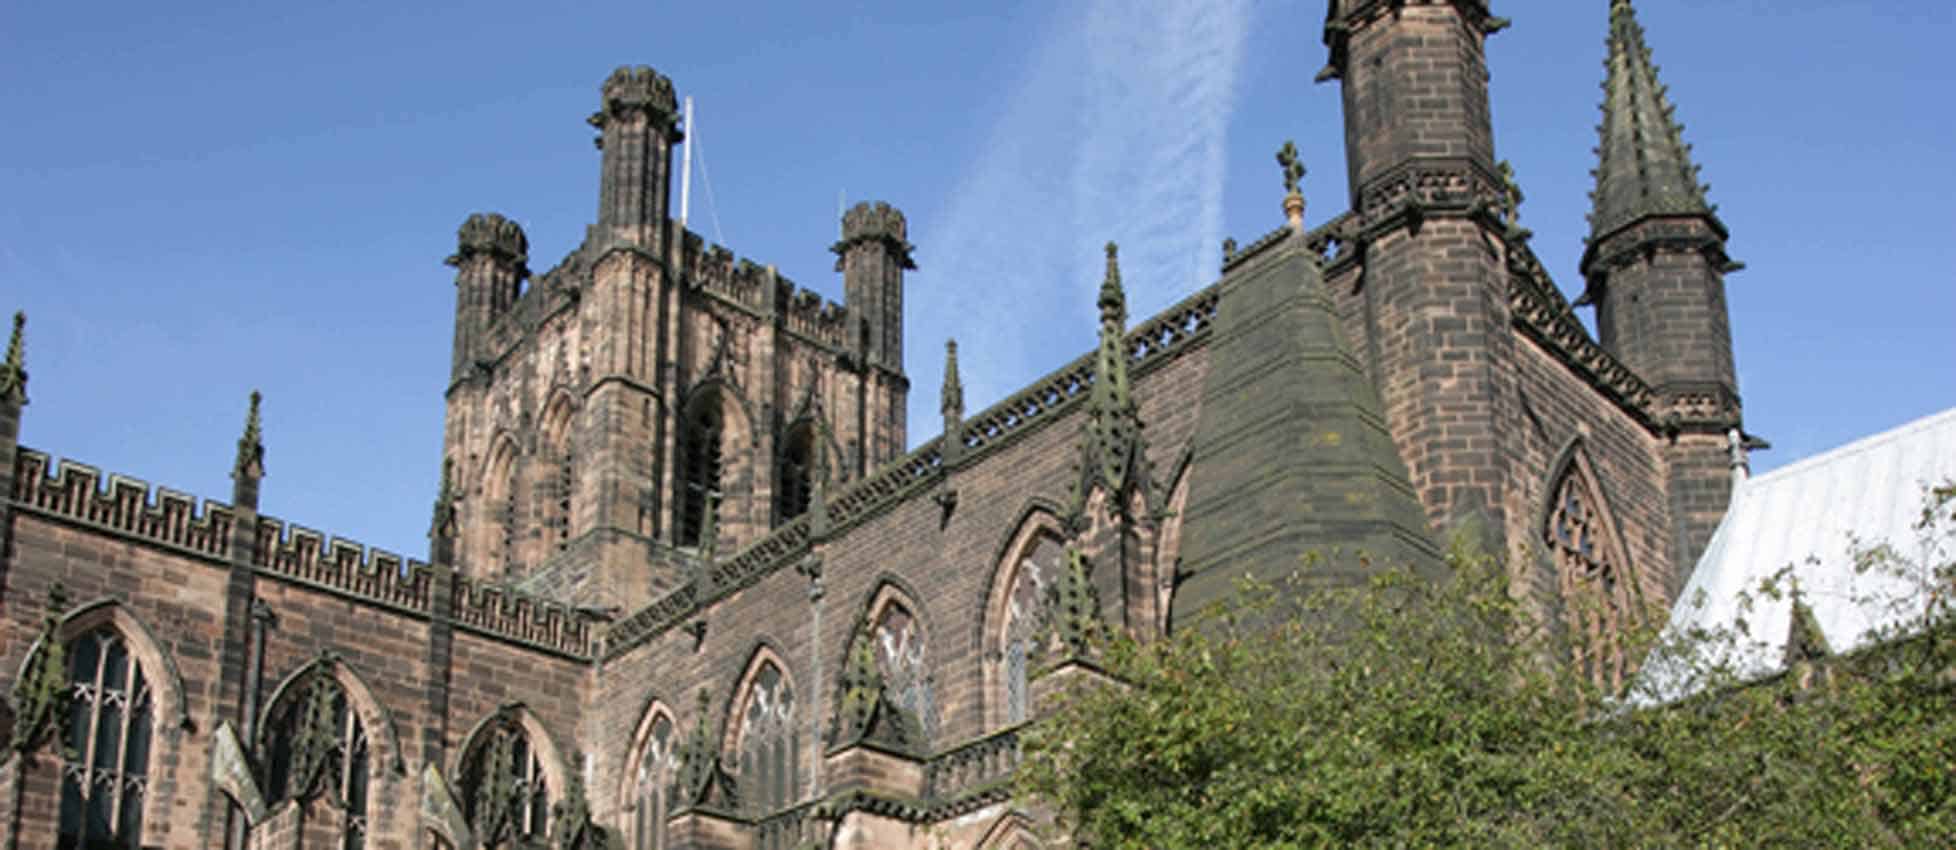 Chester Cathedral - The Association of English Cathedrals